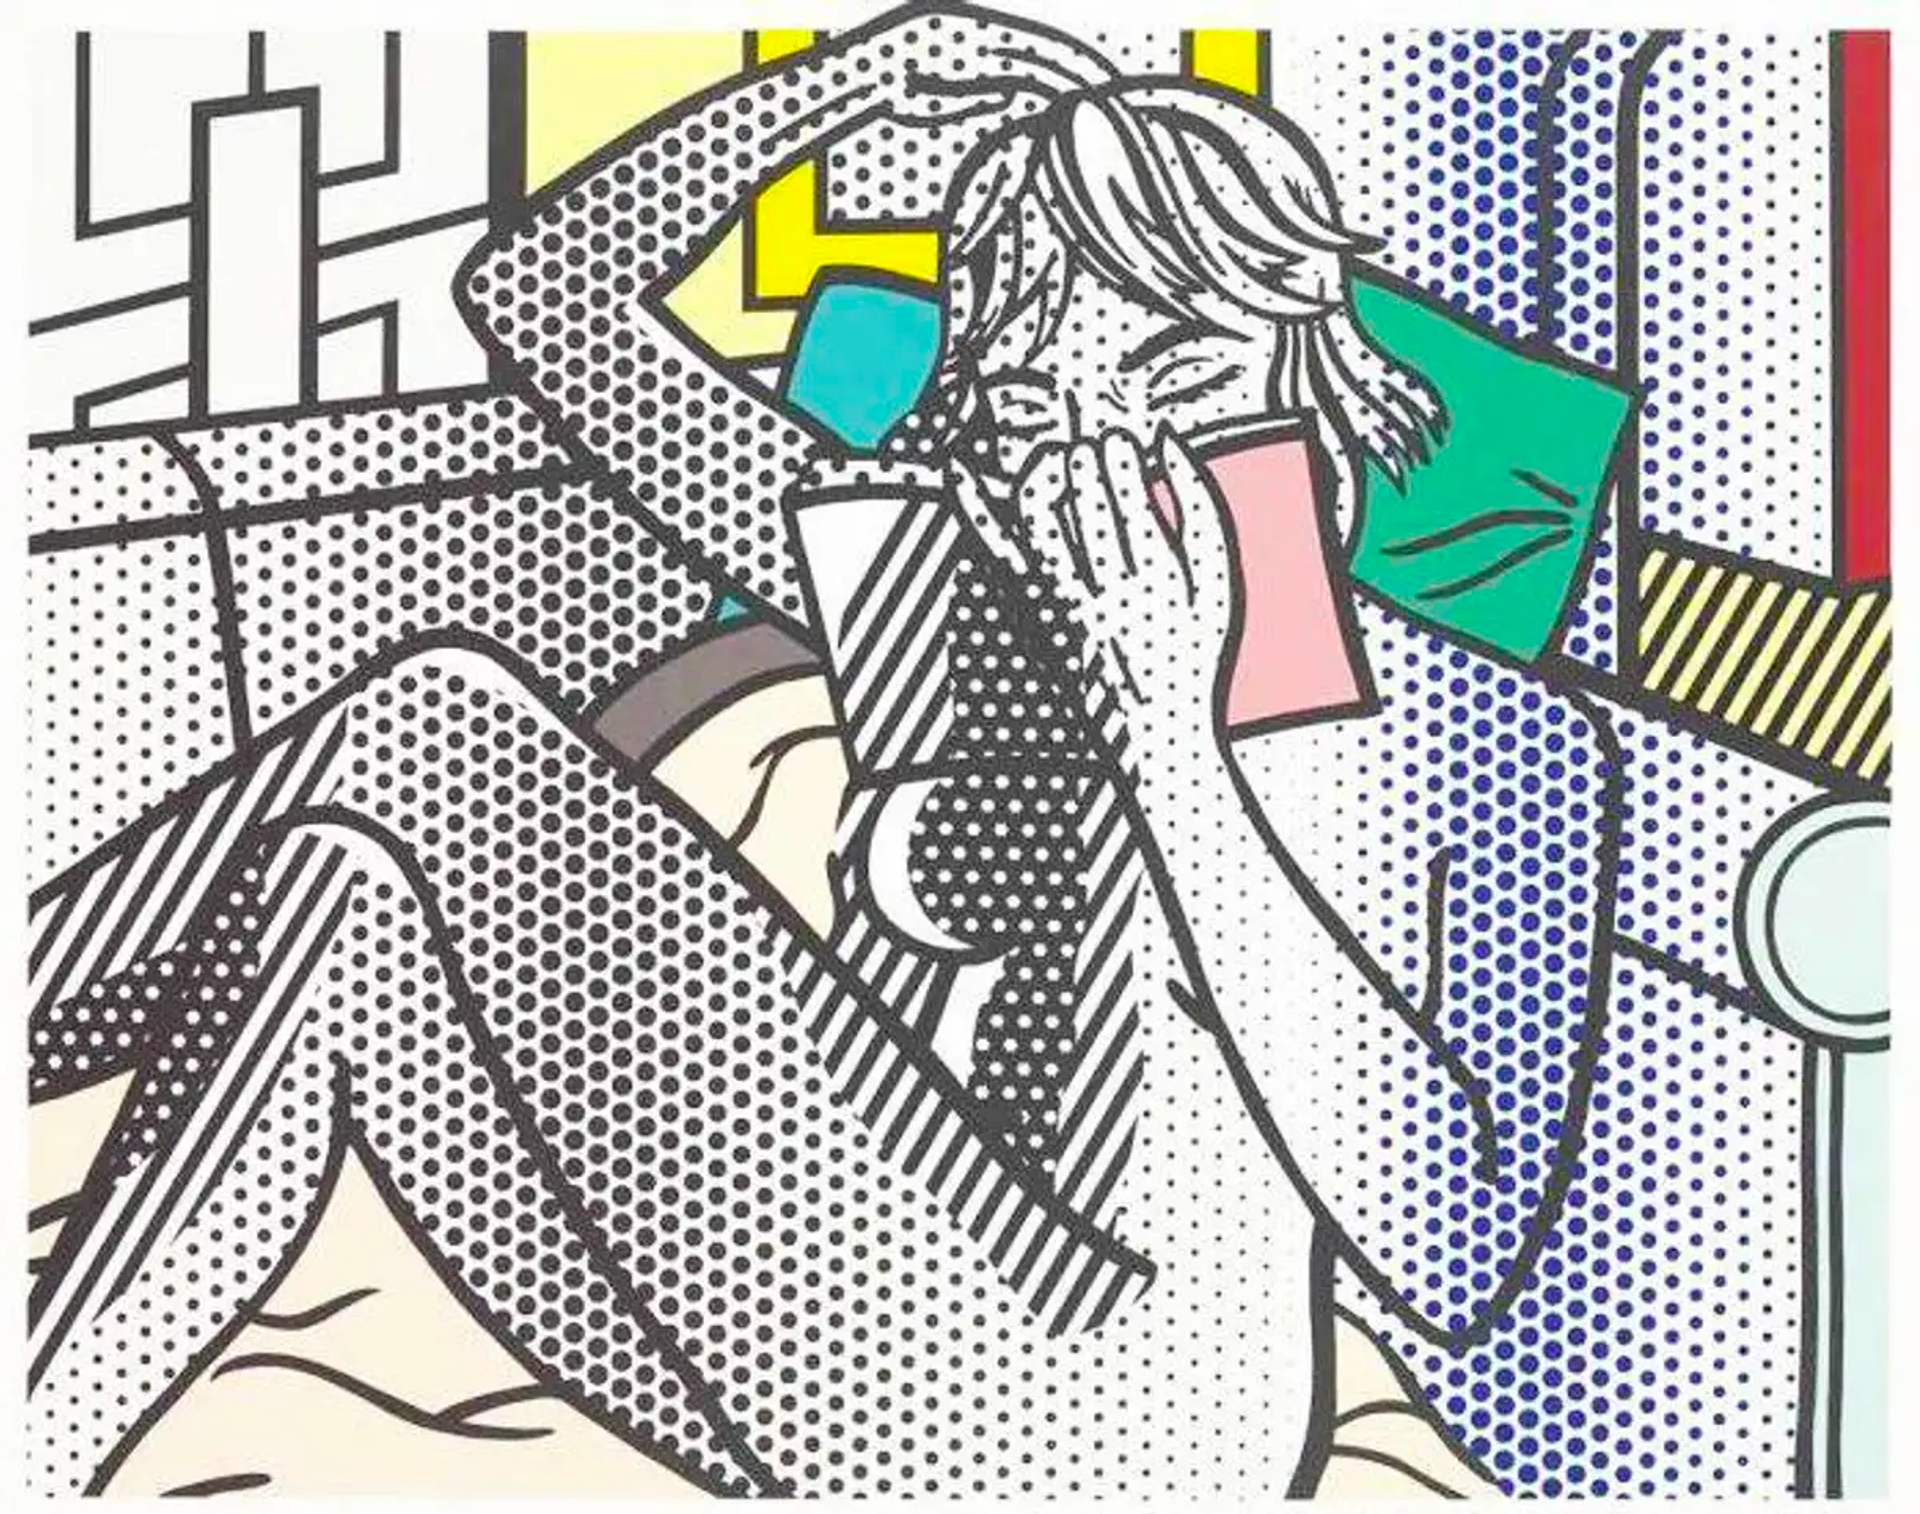 Roy Lichtenstein's Benday Dot Print depicting a cross-legged nude woman reading a book on a couch.